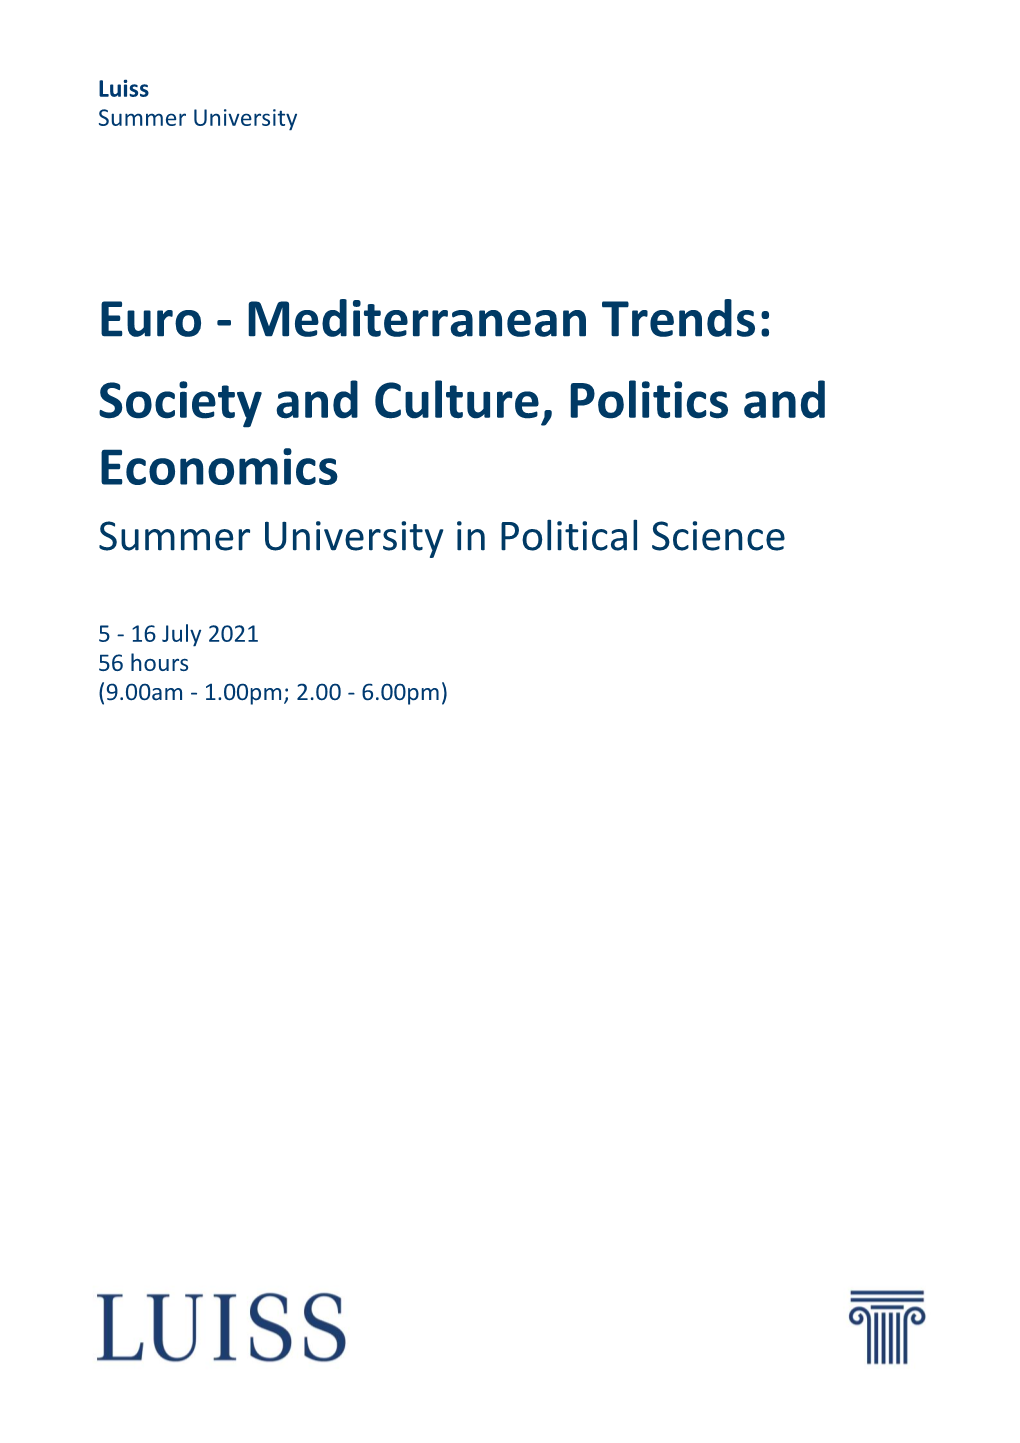 Euro - Mediterranean Trends: Society and Culture, Politics and Economics Summer University in Political Science